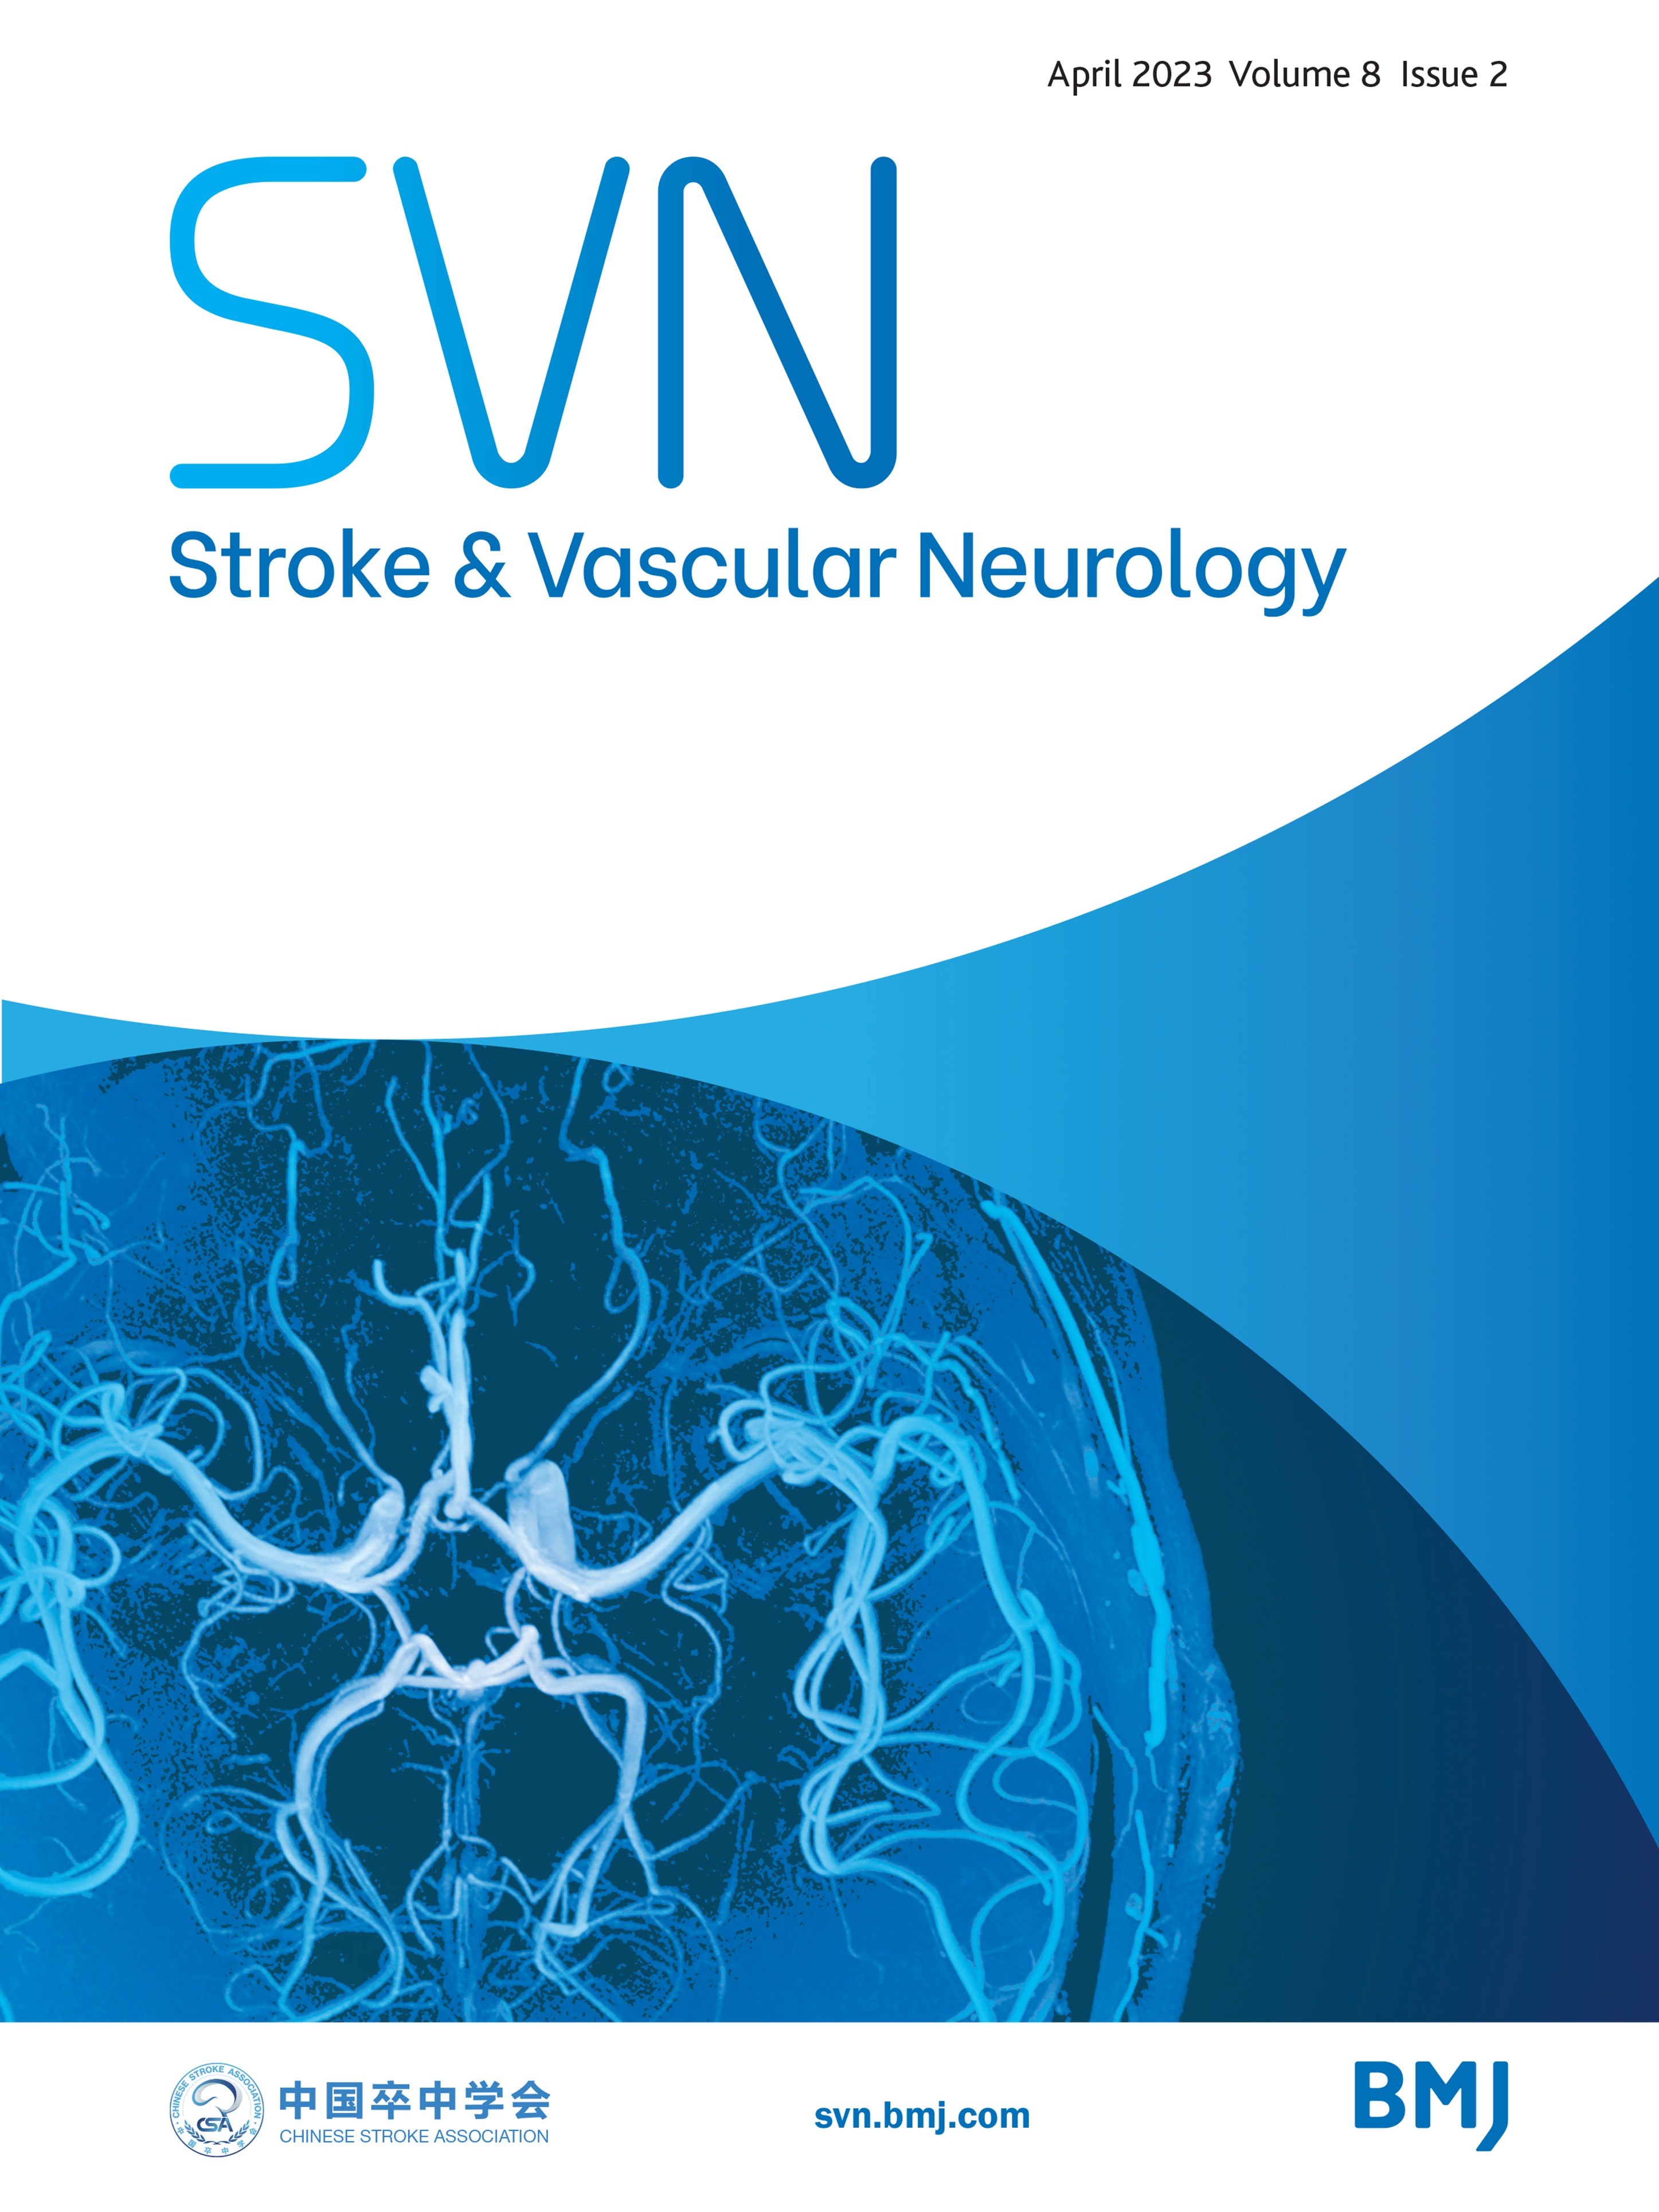 Endovascular therapy in acute anterior circulation large vessel occlusive patients with a large infarct core (ANGEL-ASPECT): protocol of a multicentre randomised trial